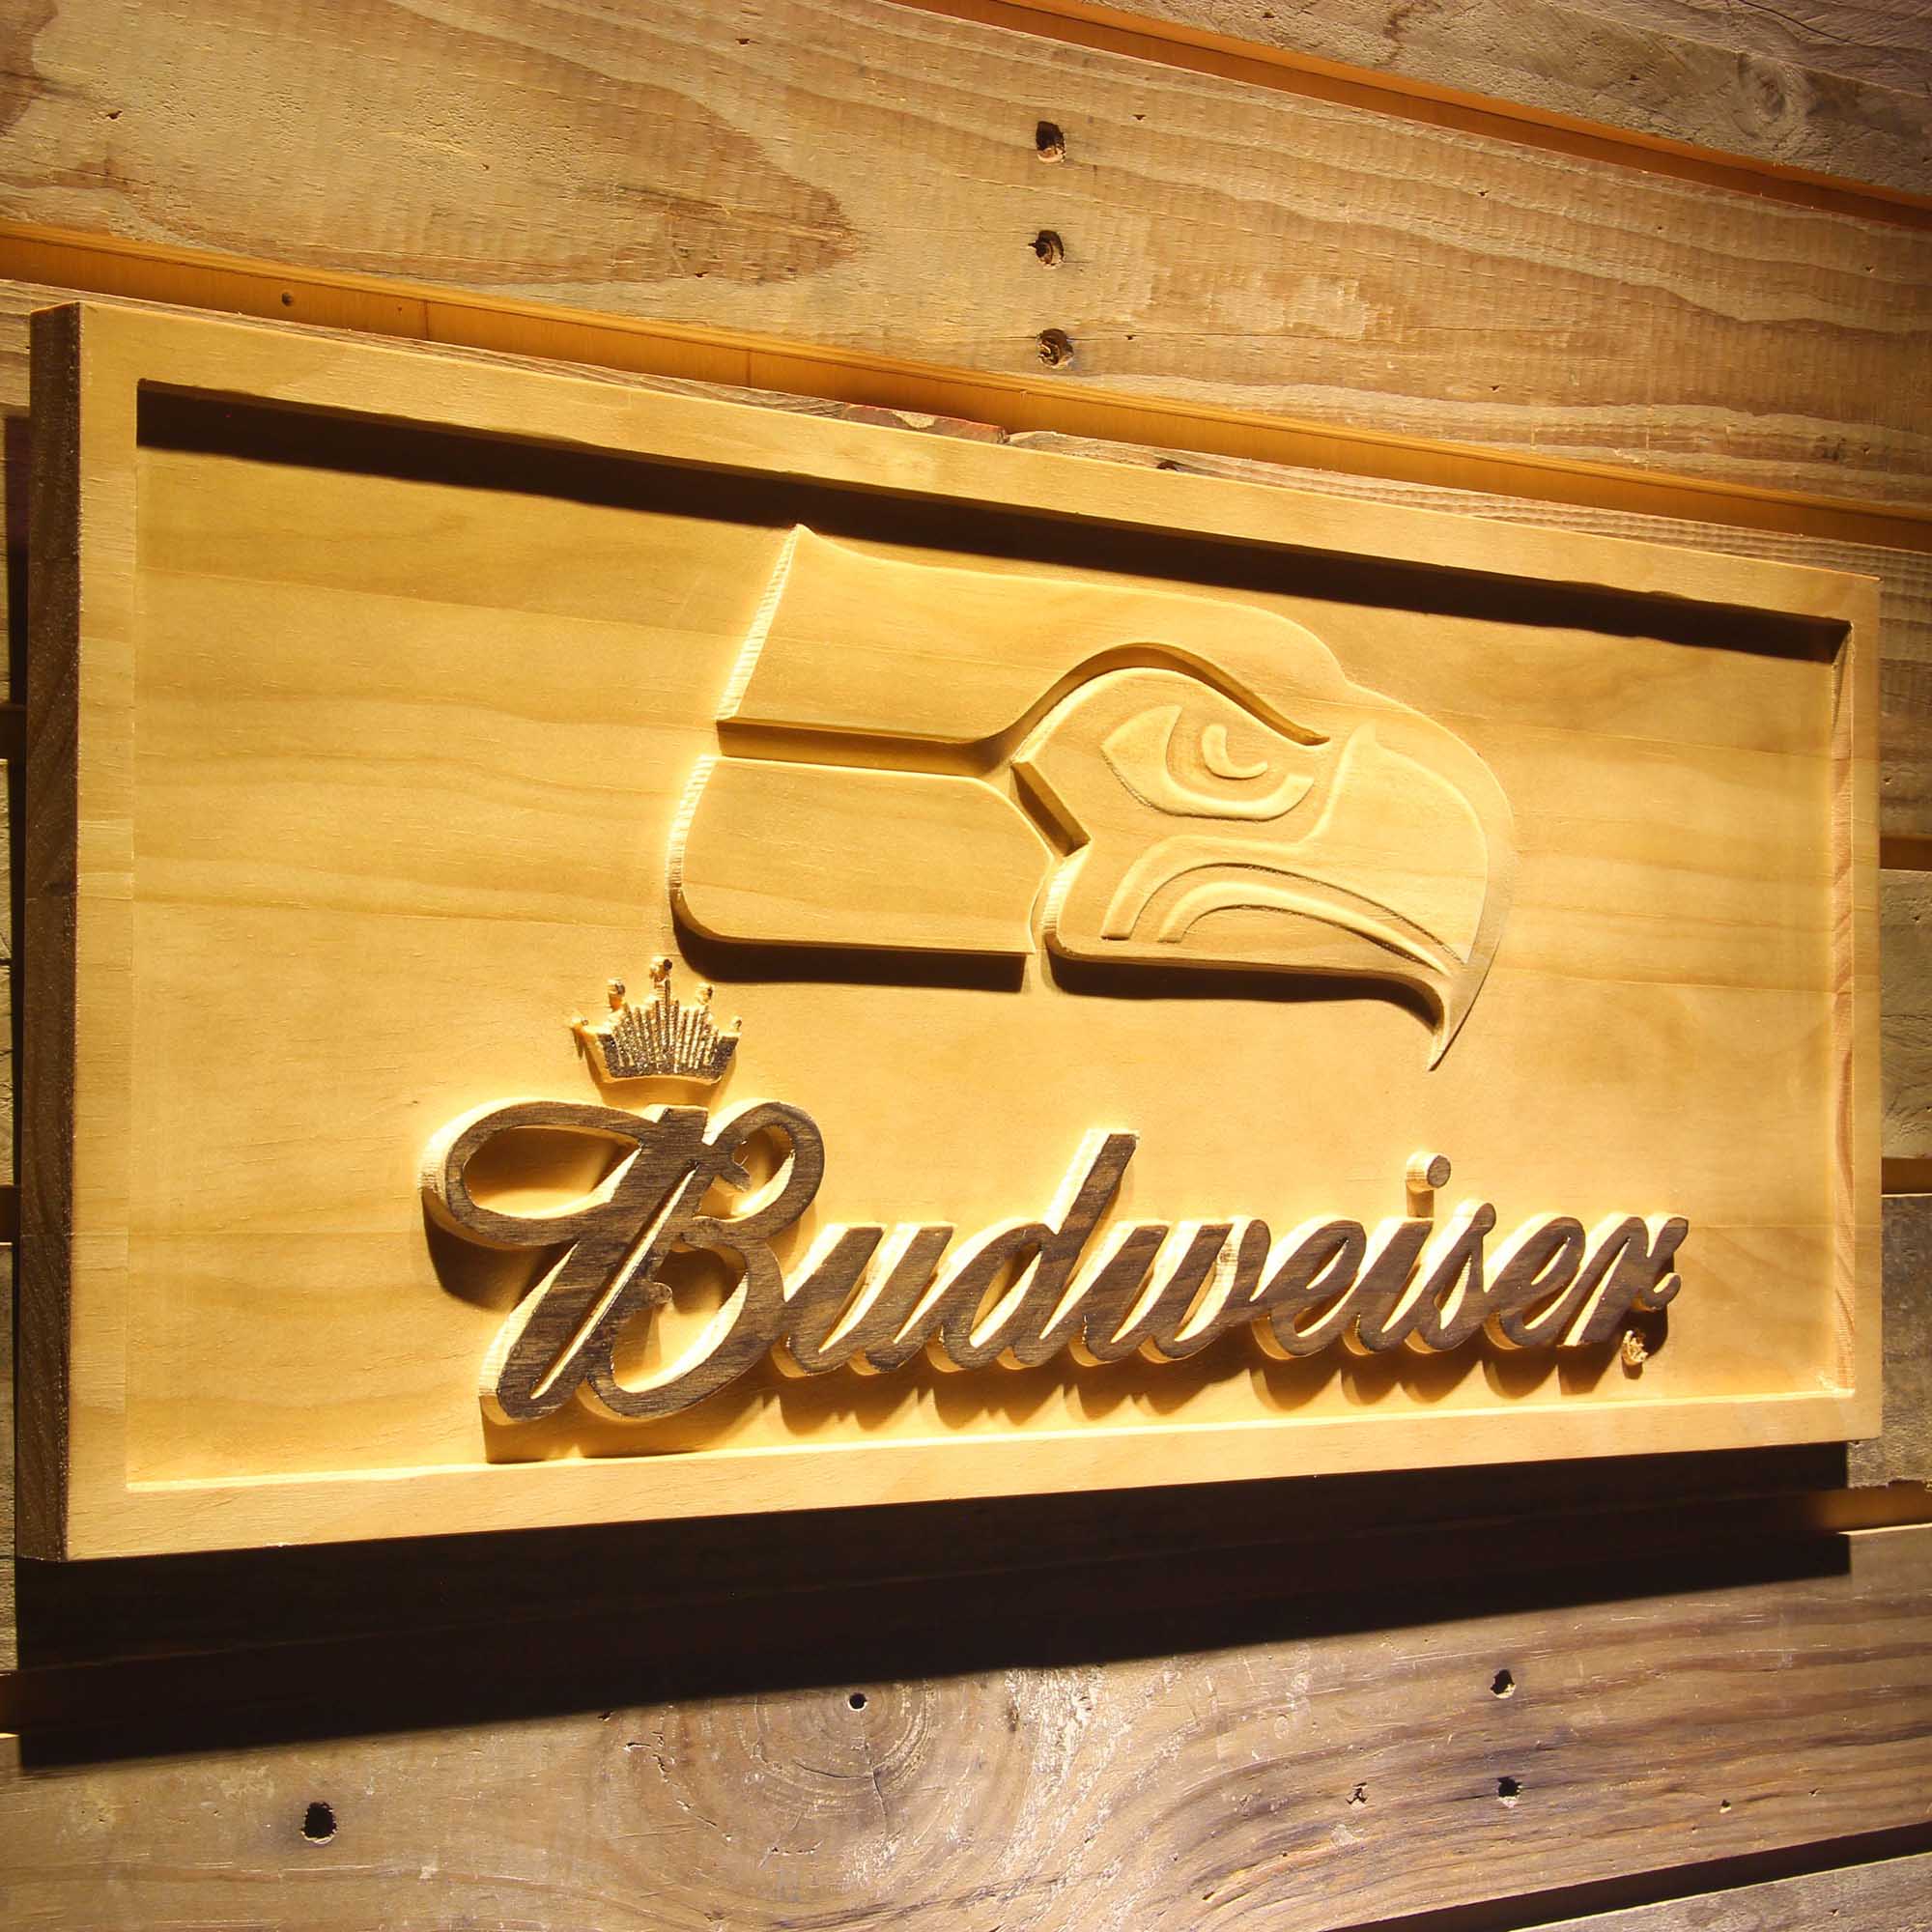 Seattle Seahawks Budweiser 3D Solid Wooden Craving Sign